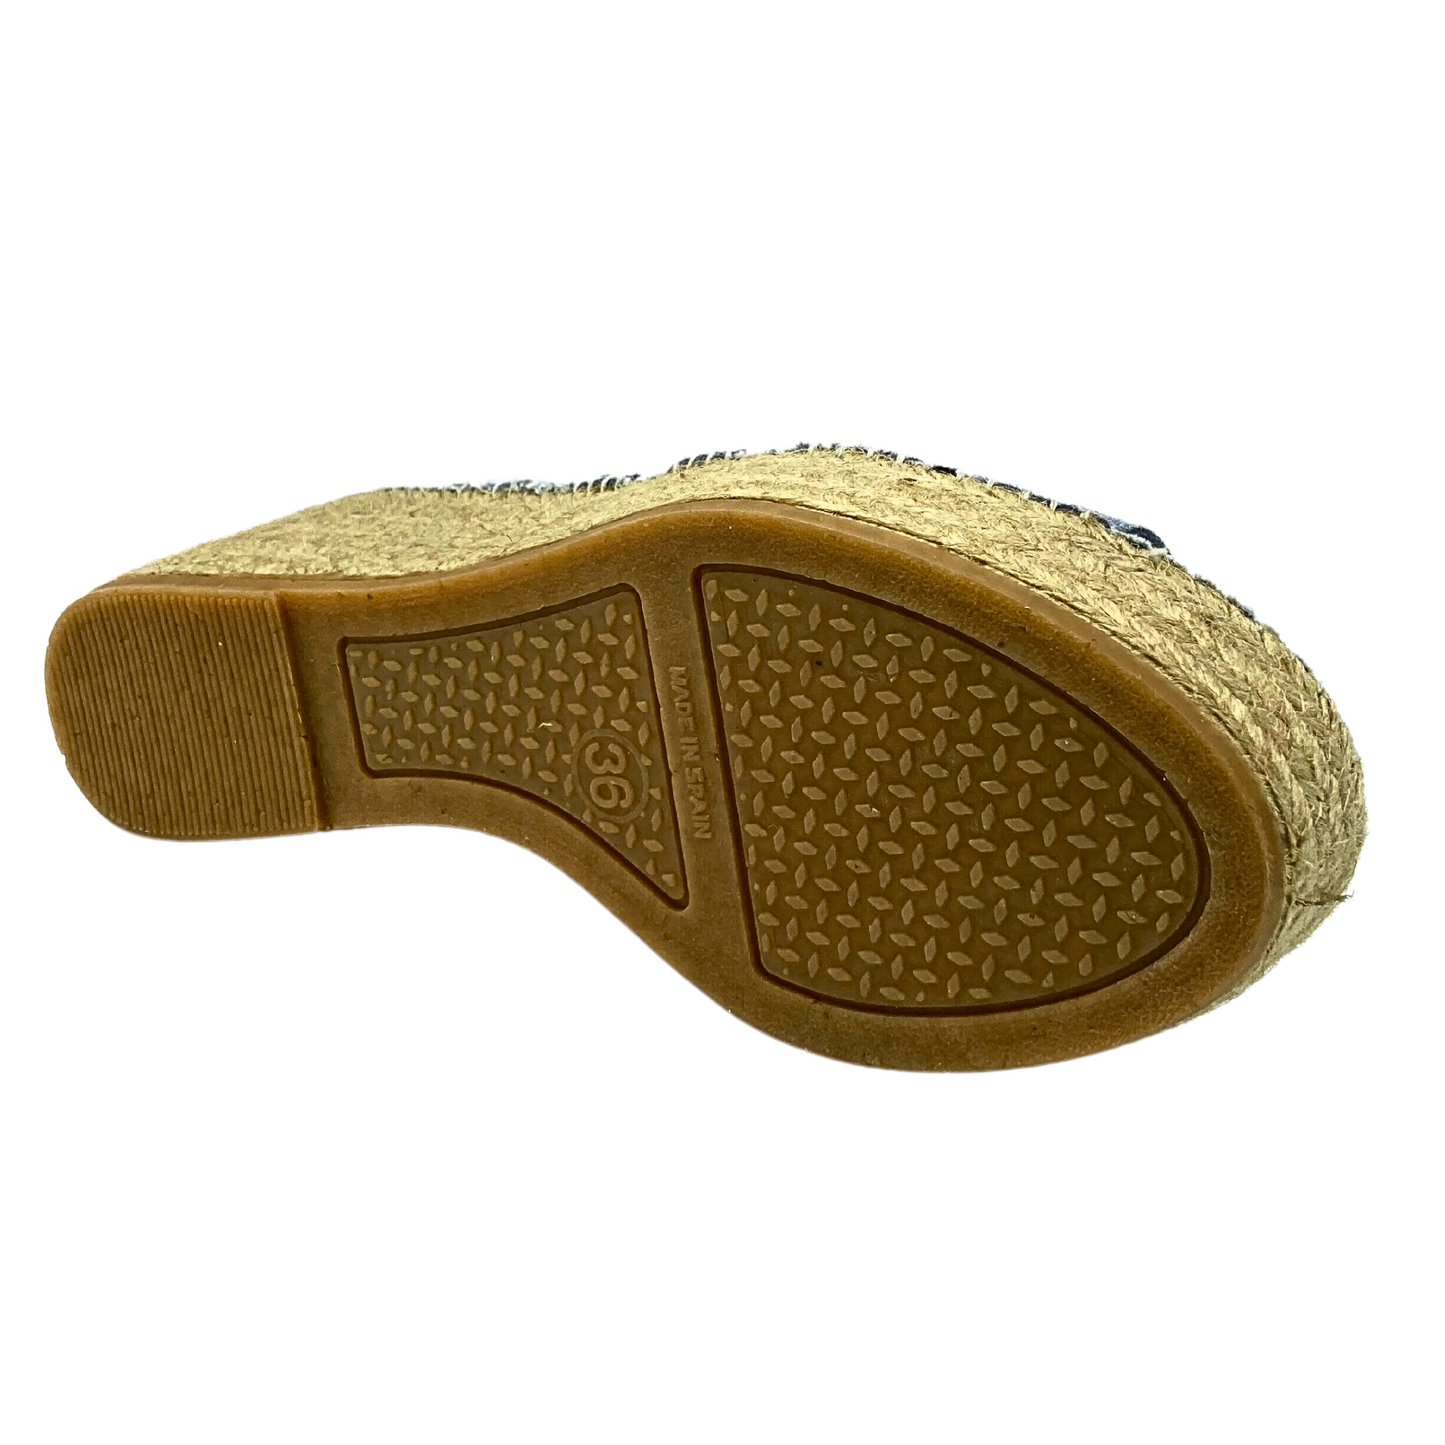 Sole of Toni Pons Iria sandal.  Sole is constructed of rubber